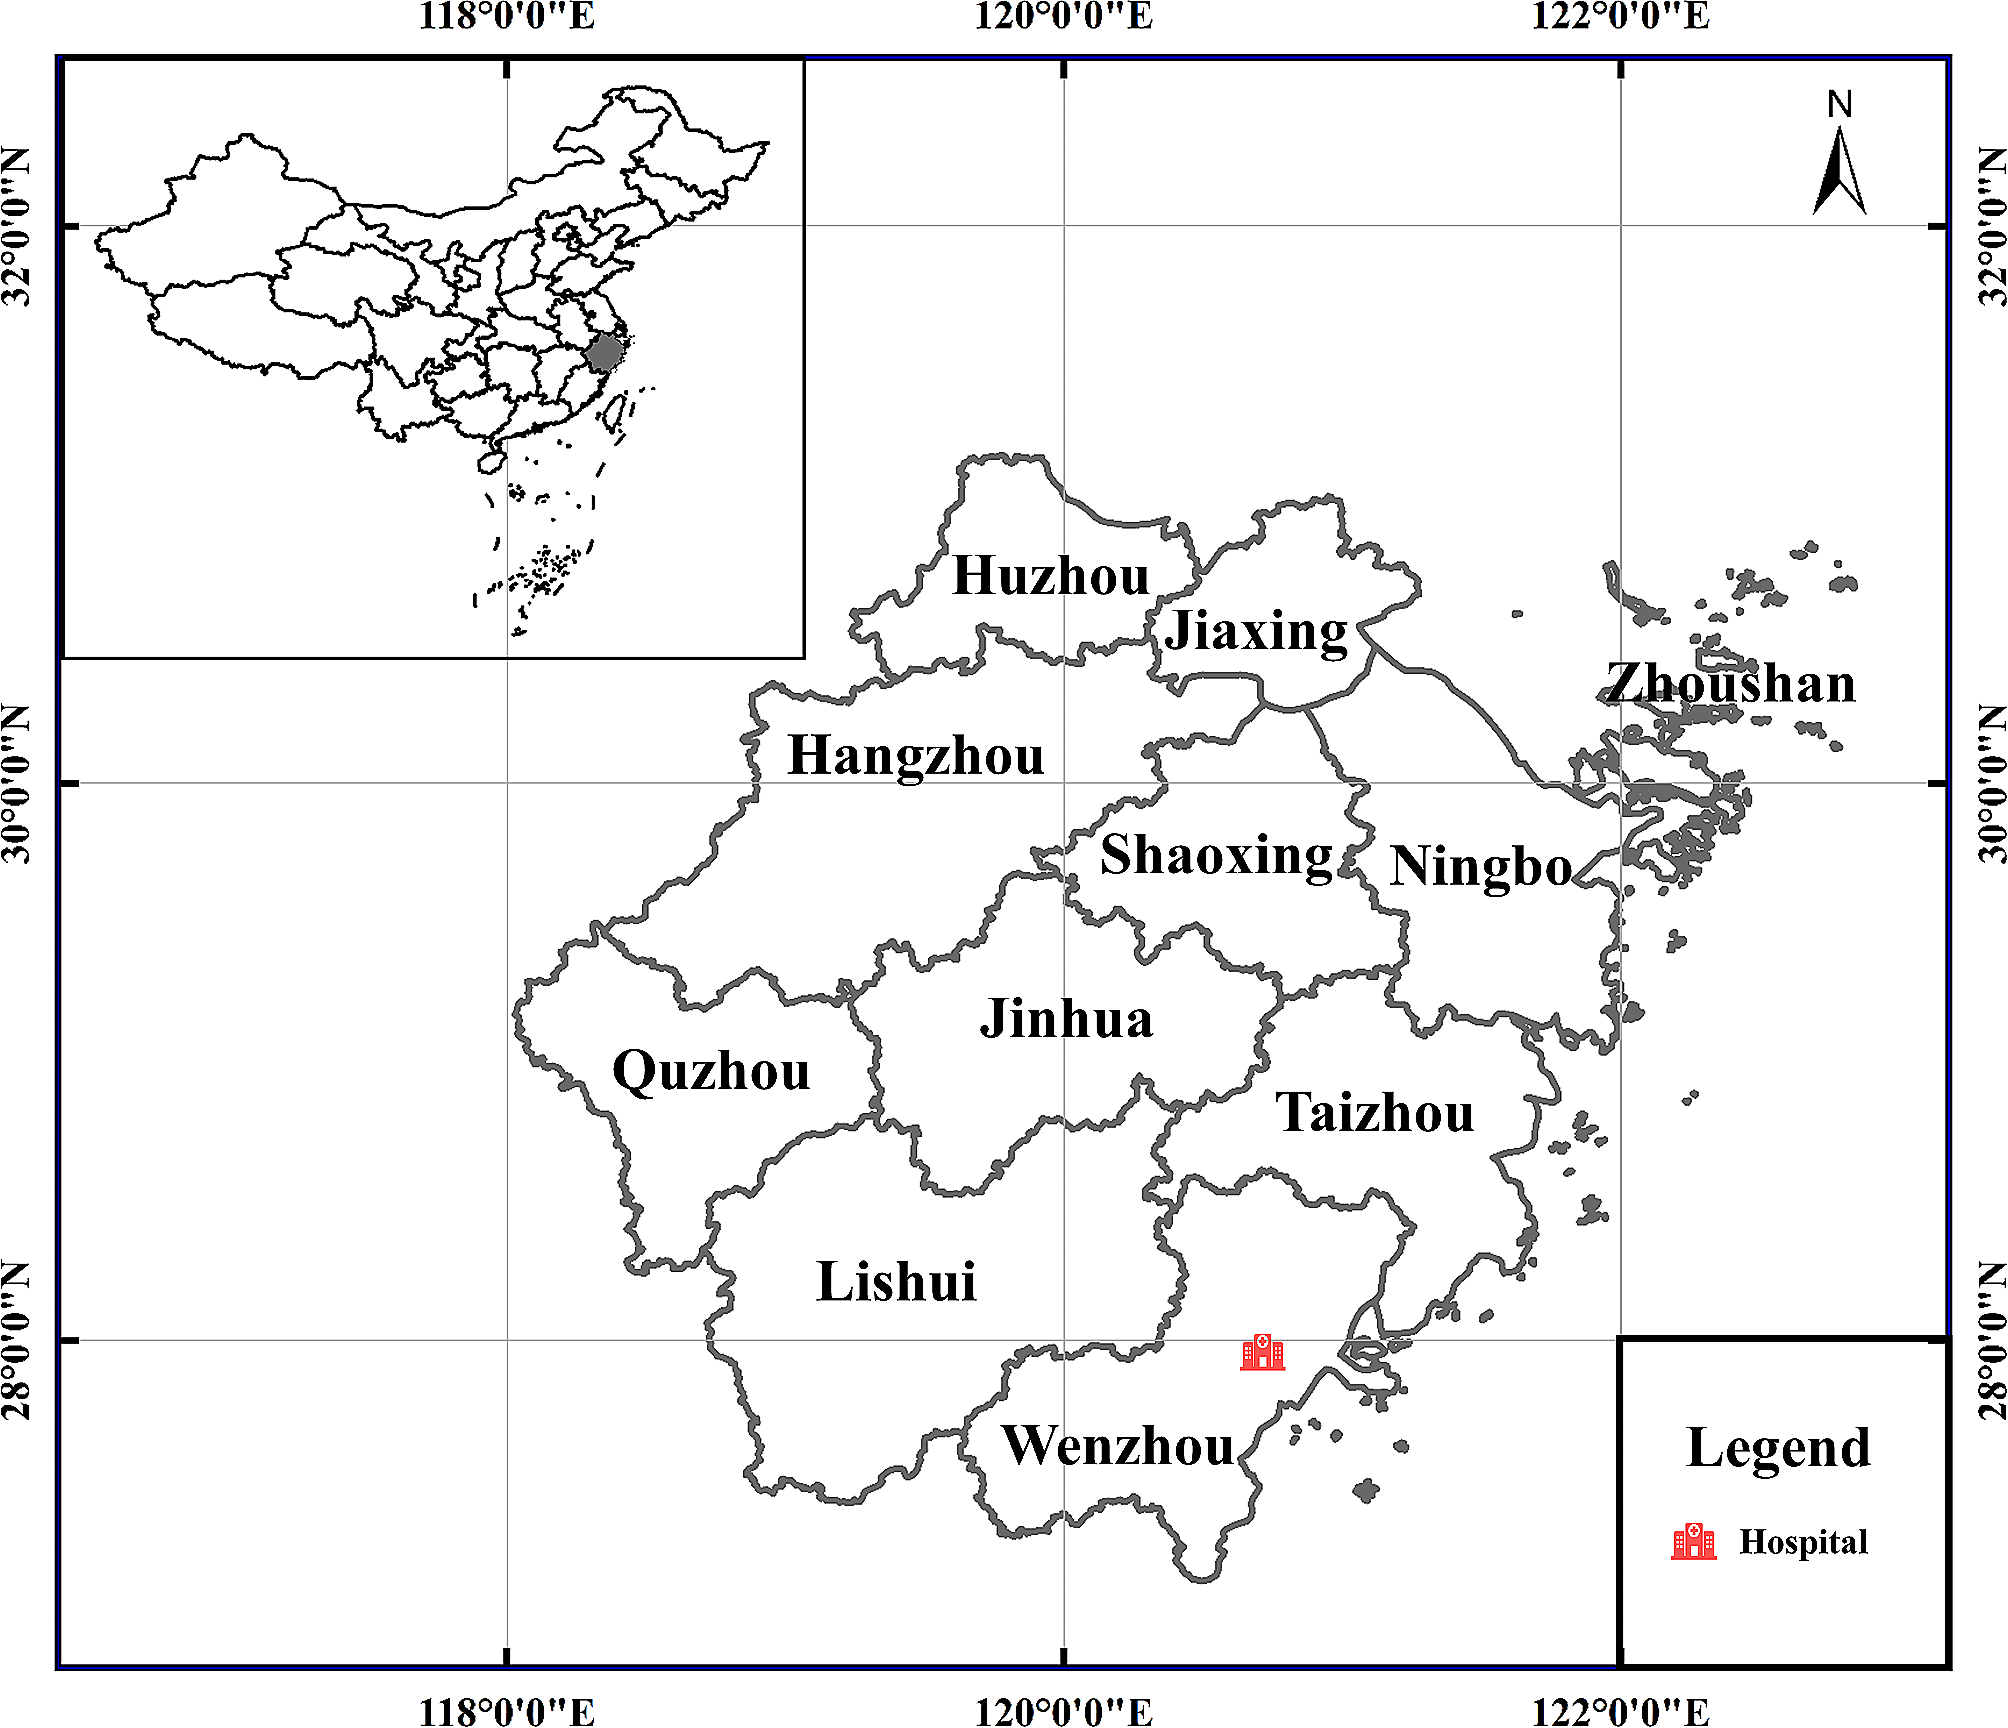 Genetic characterizations of Cryptosporidium spp. from children with or without diarrhea in Wenzhou, China: high probability of zoonotic transmission